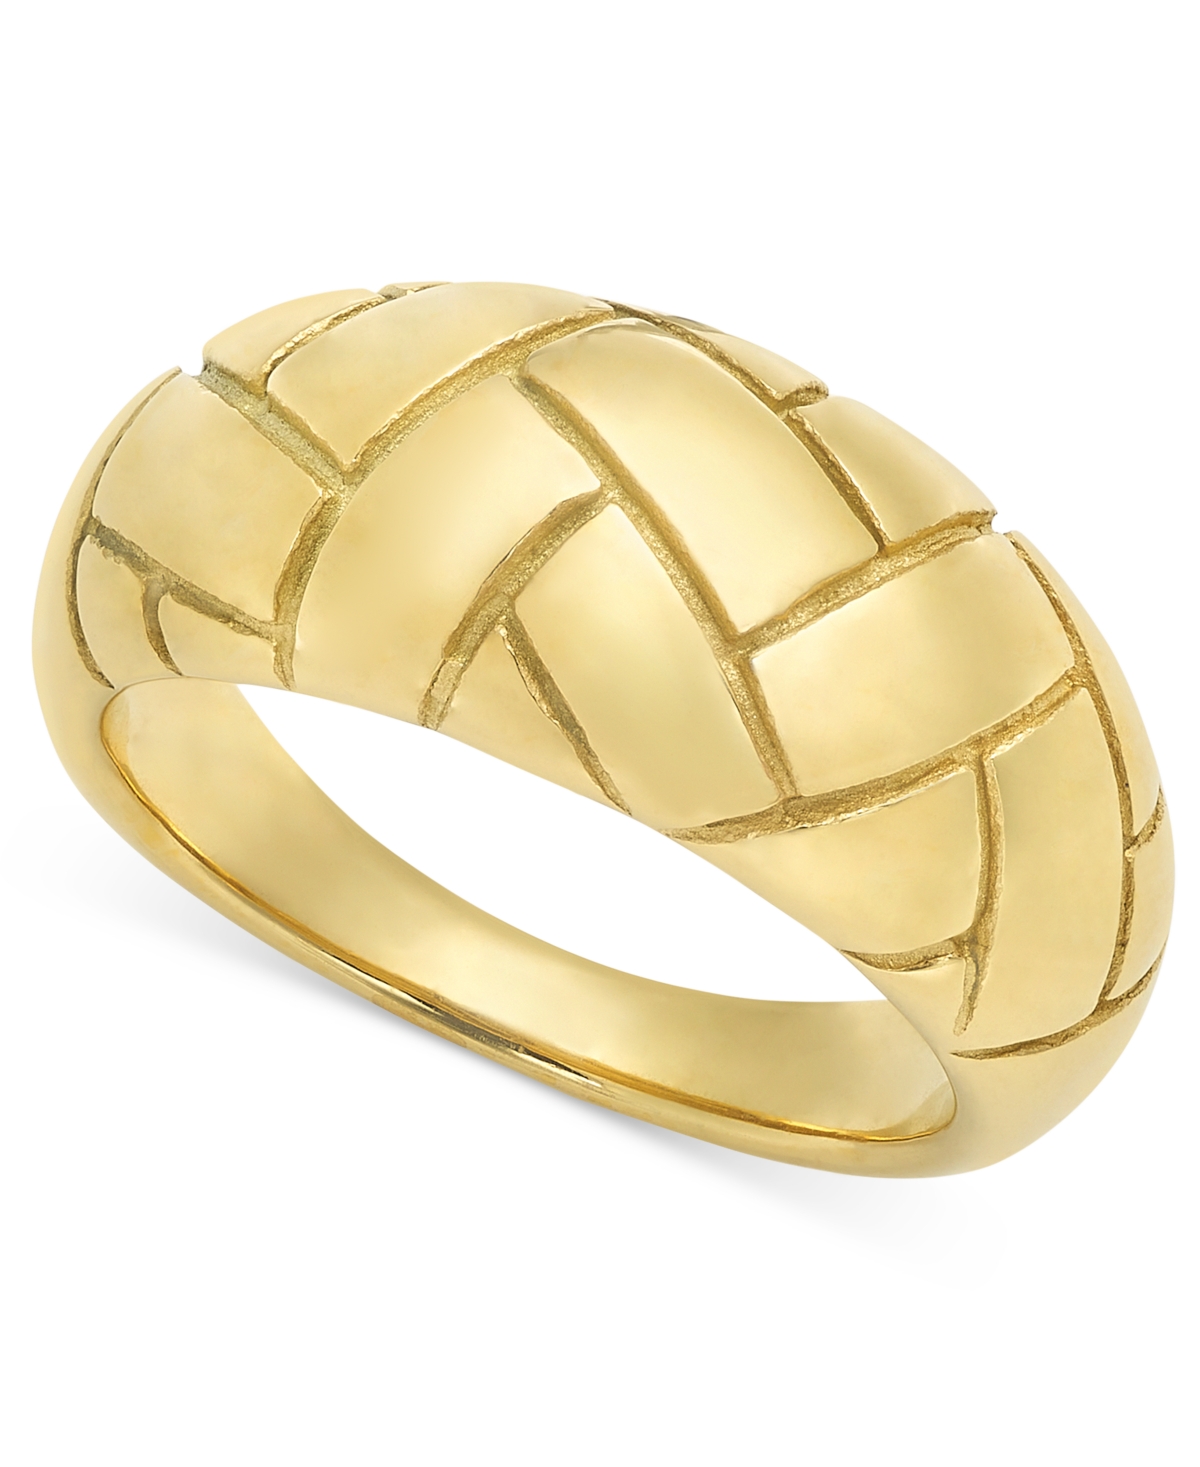 Lola Ade 18k Gold-plated Stainless Steel Biricki-etched Ring